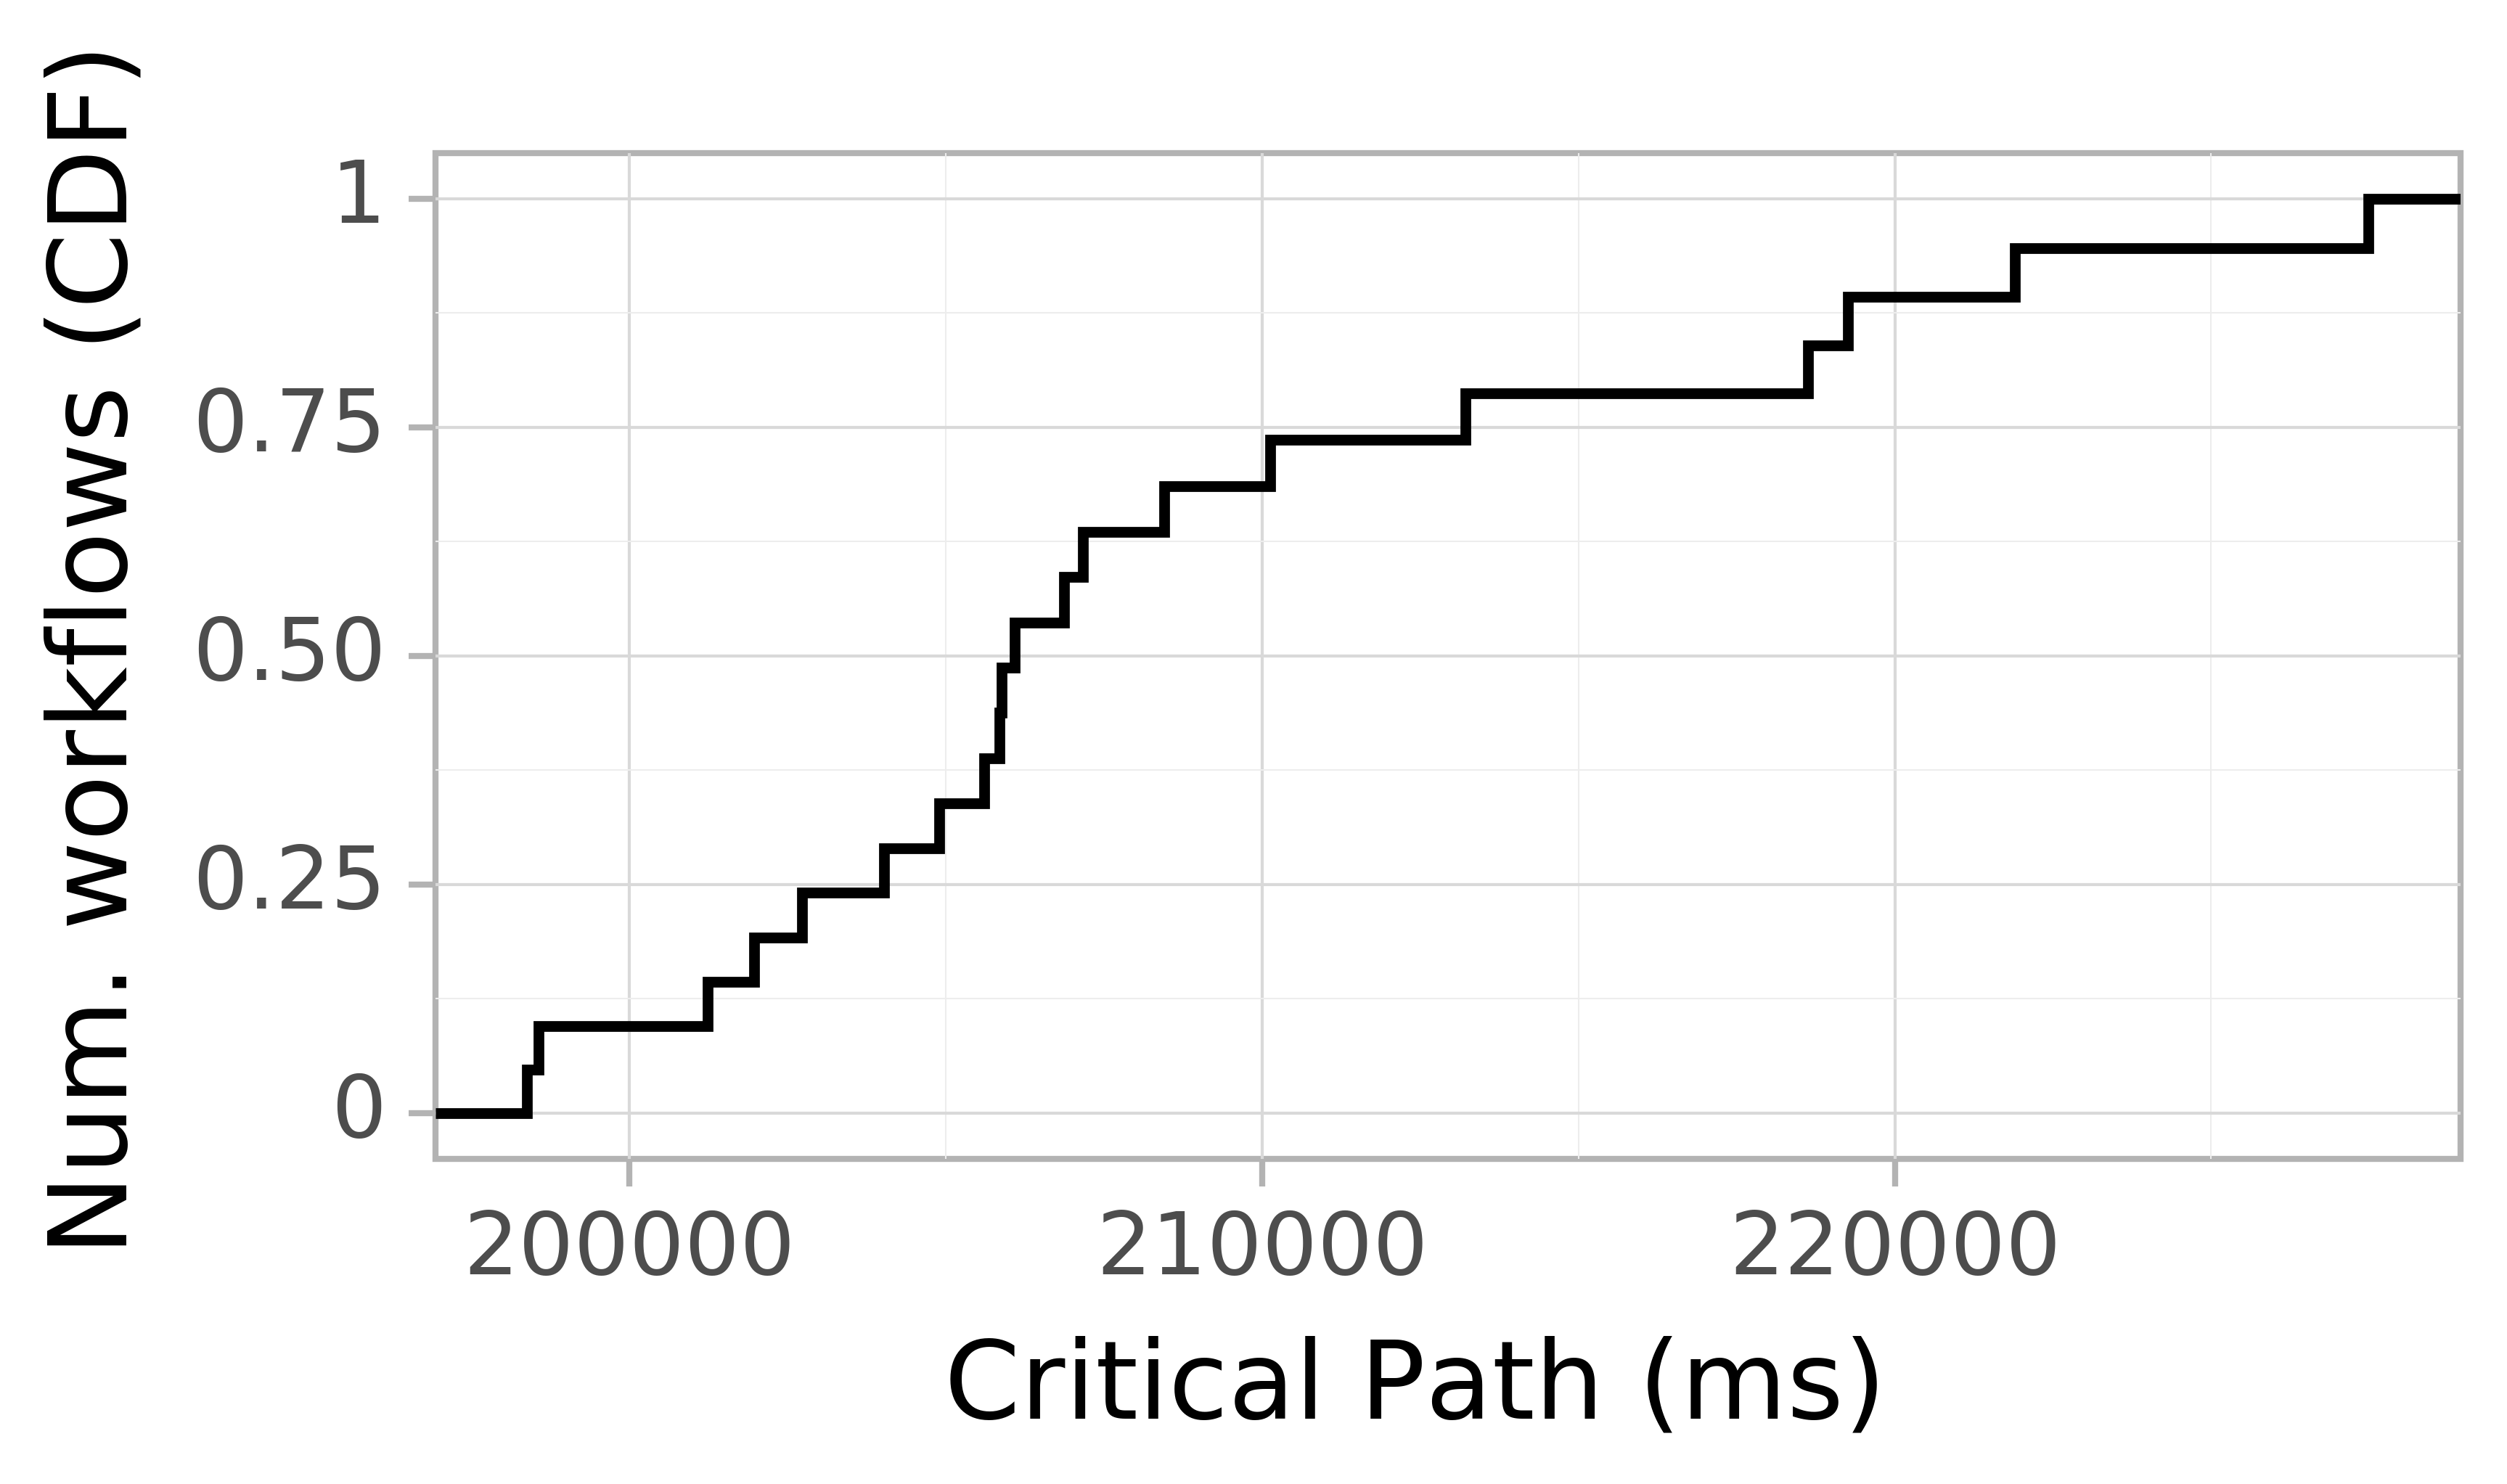 Job runtime CDF graph for the askalon-new_ee59 trace.